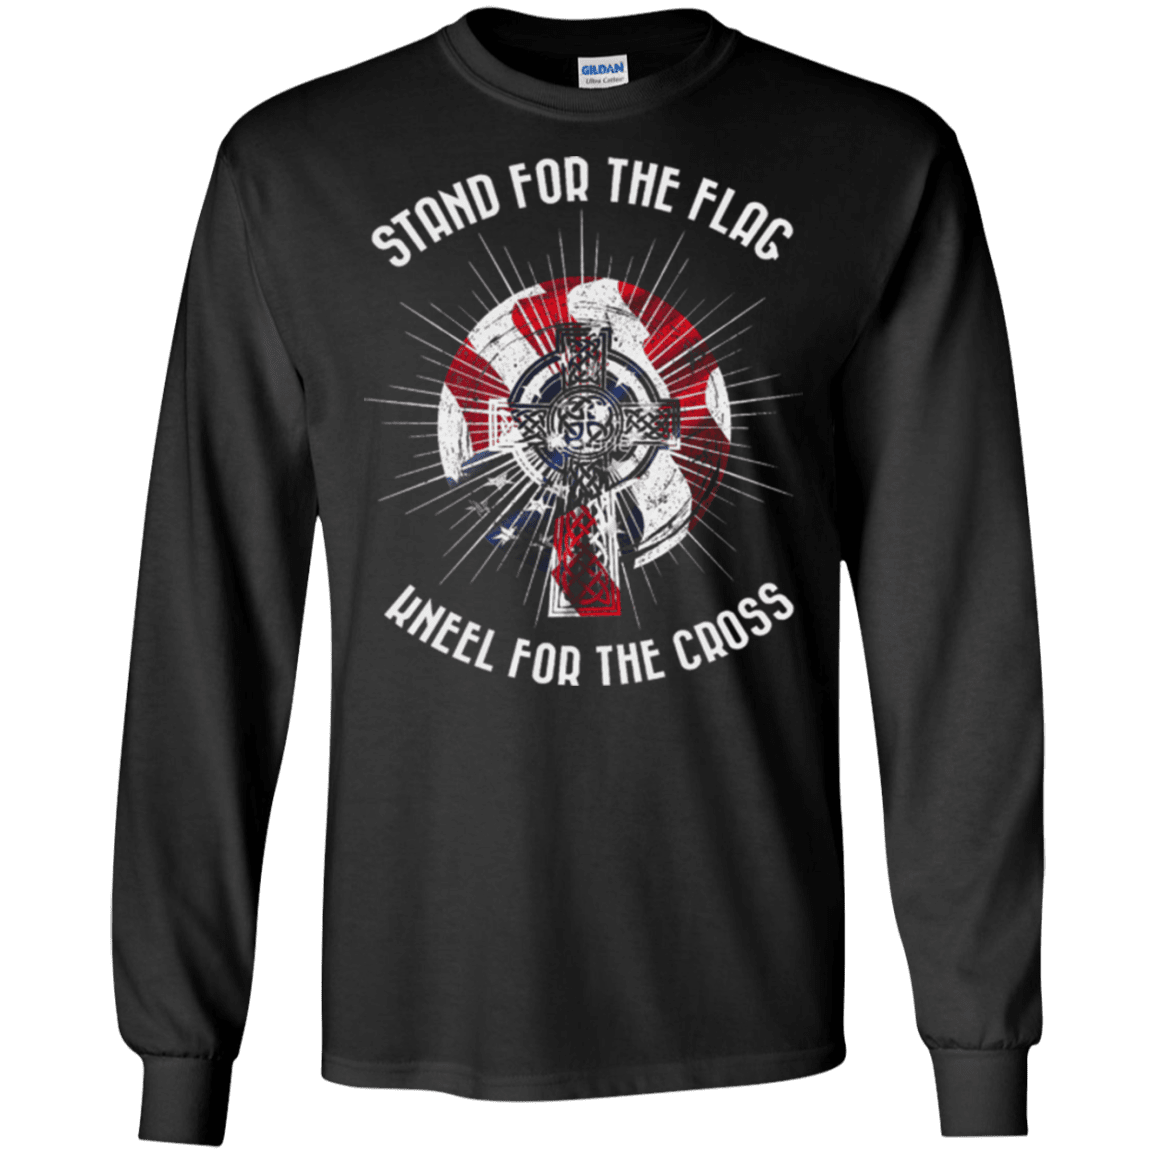 Military T-Shirt "Stand For The Flag Kneel For The Cross"-TShirt-General-Veterans Nation